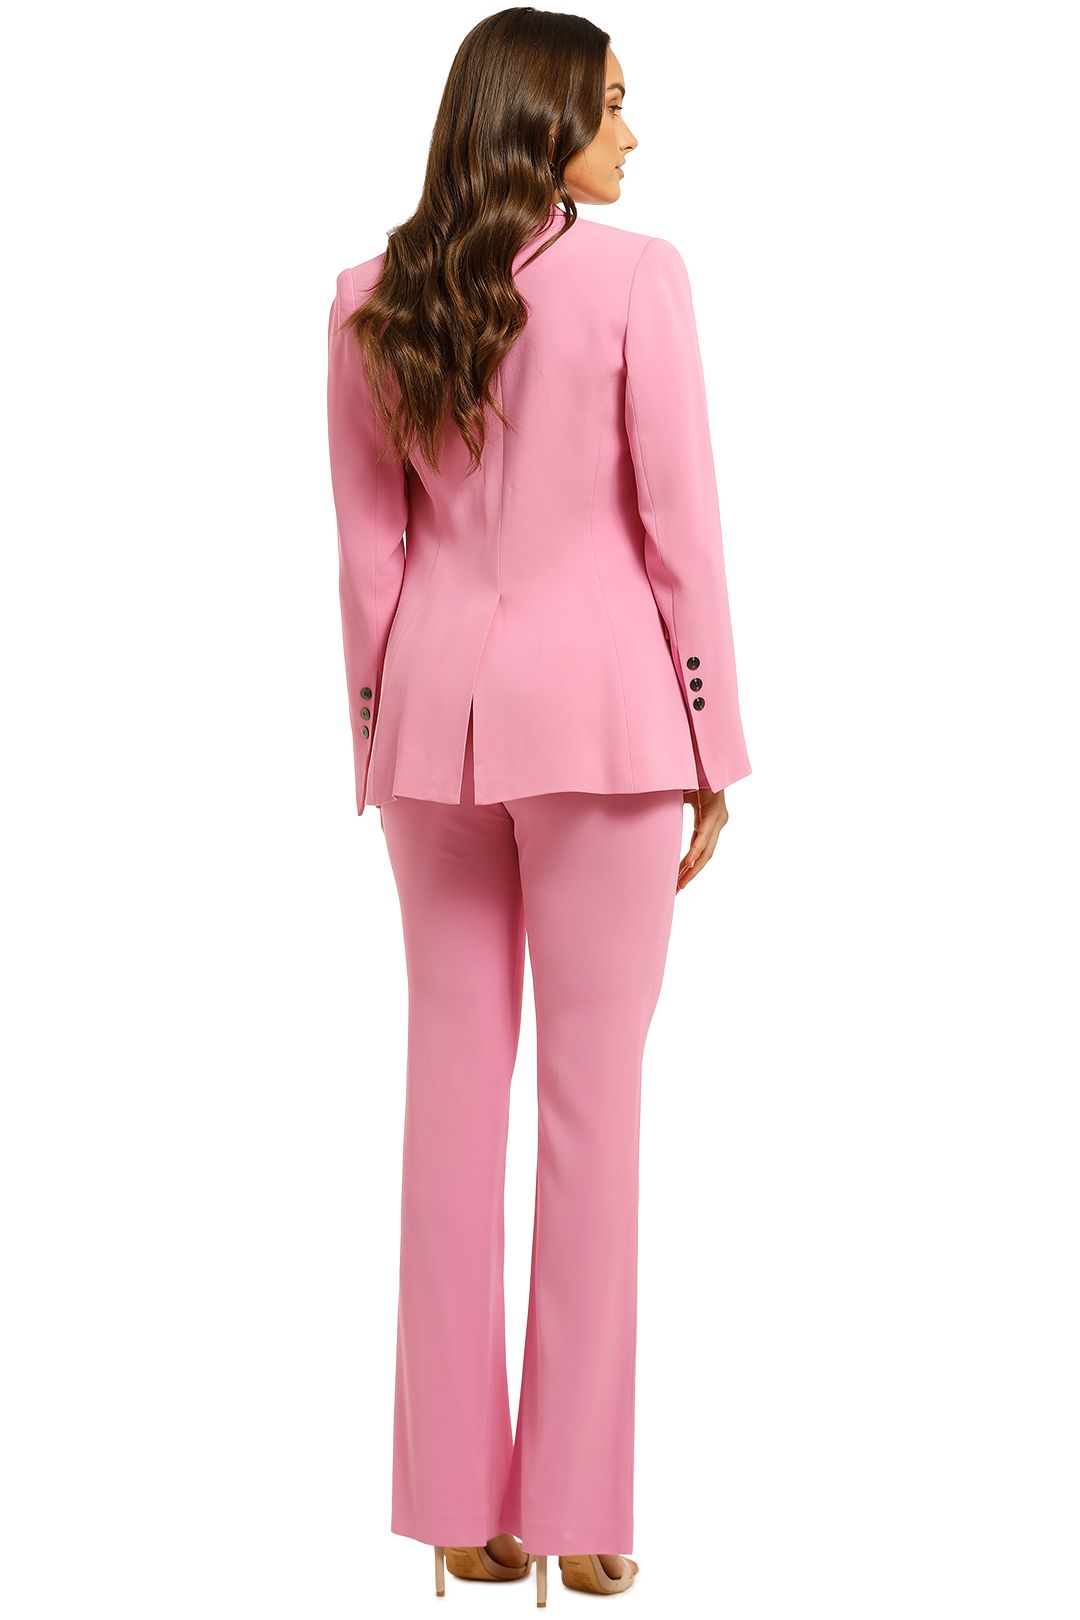 Ginger-and-Smart-Elixer-Jacket-and-Pant-Set-Passion-Pink-Back